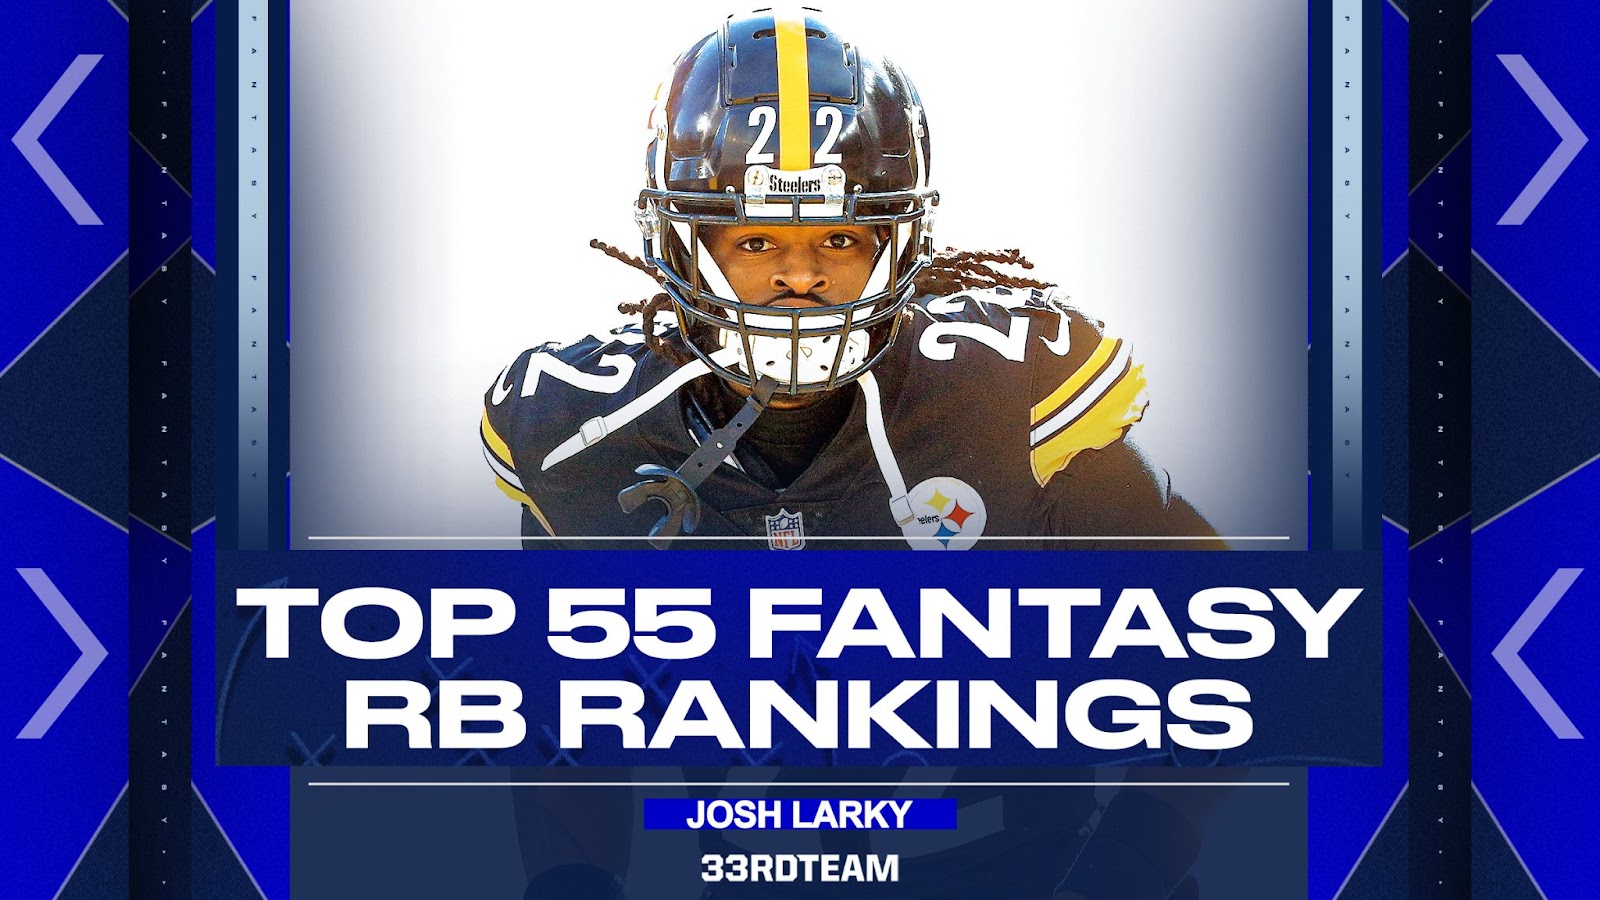 2023 NFL Free Agency: Ranking Top 10 Running Backs on the Market